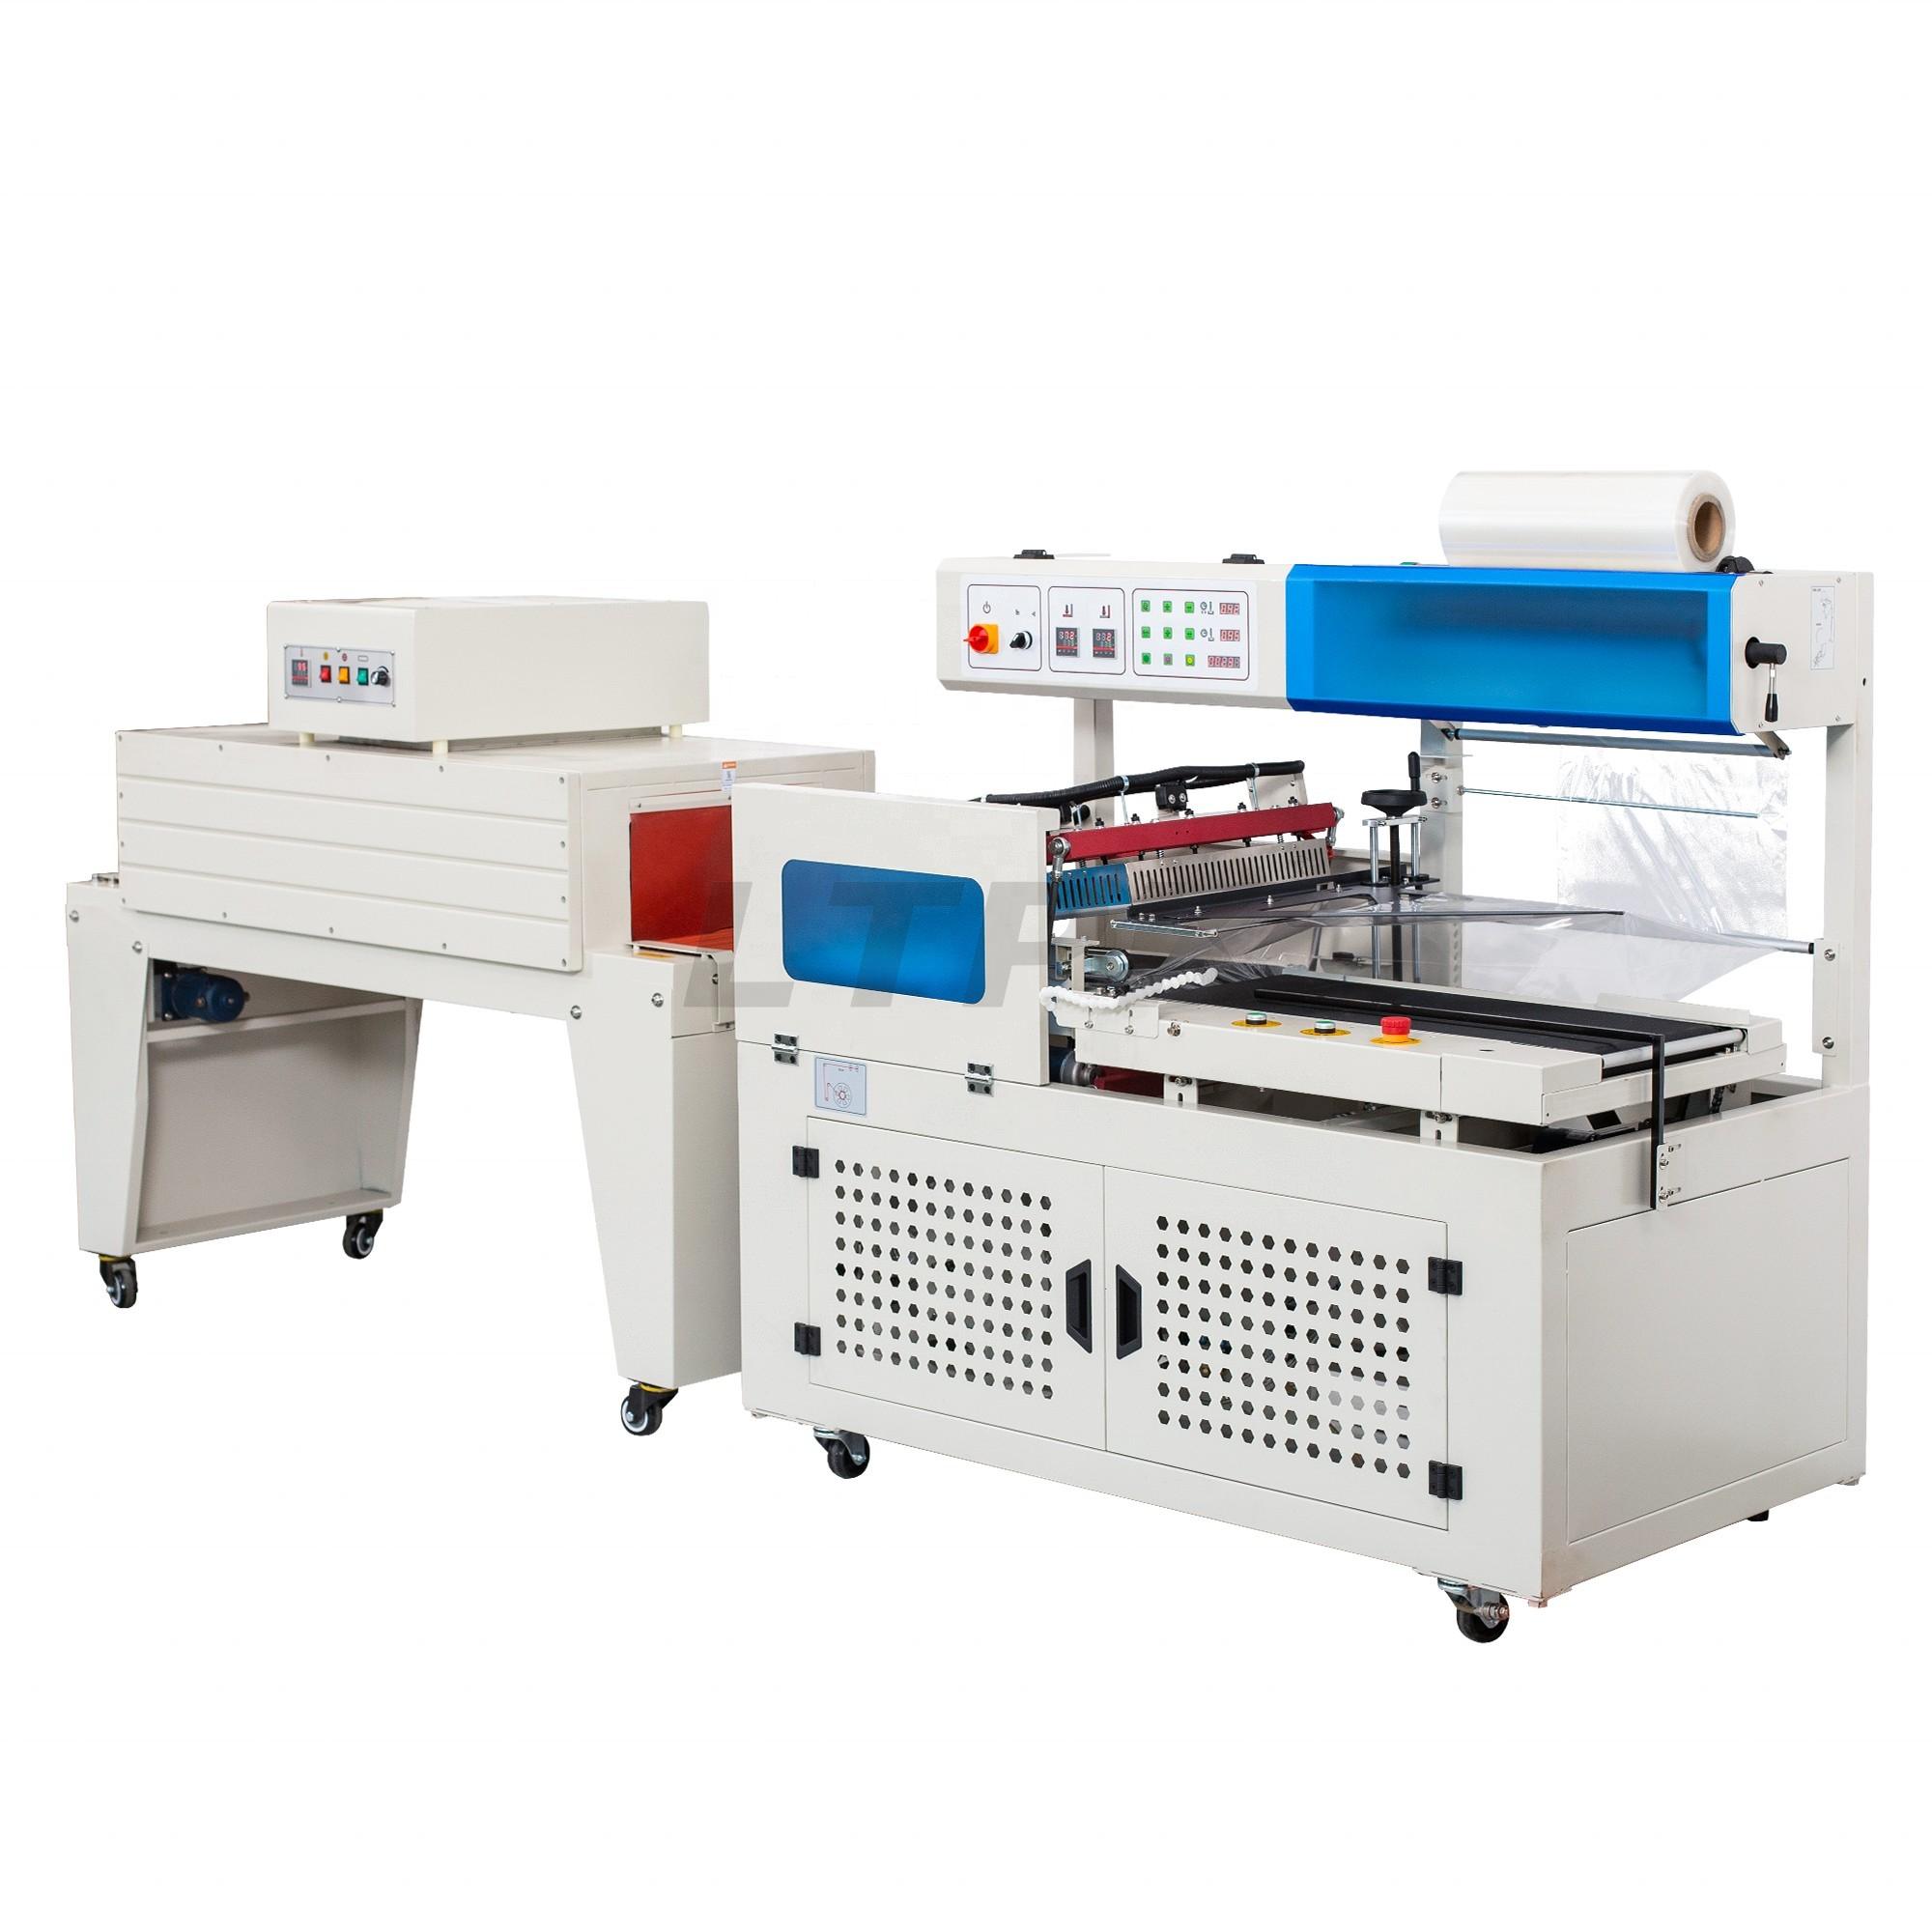  DQL5545D Automatic L-bar Sealer L type sealing packaging machine and DSB4522 Shrink Tunnel Packager